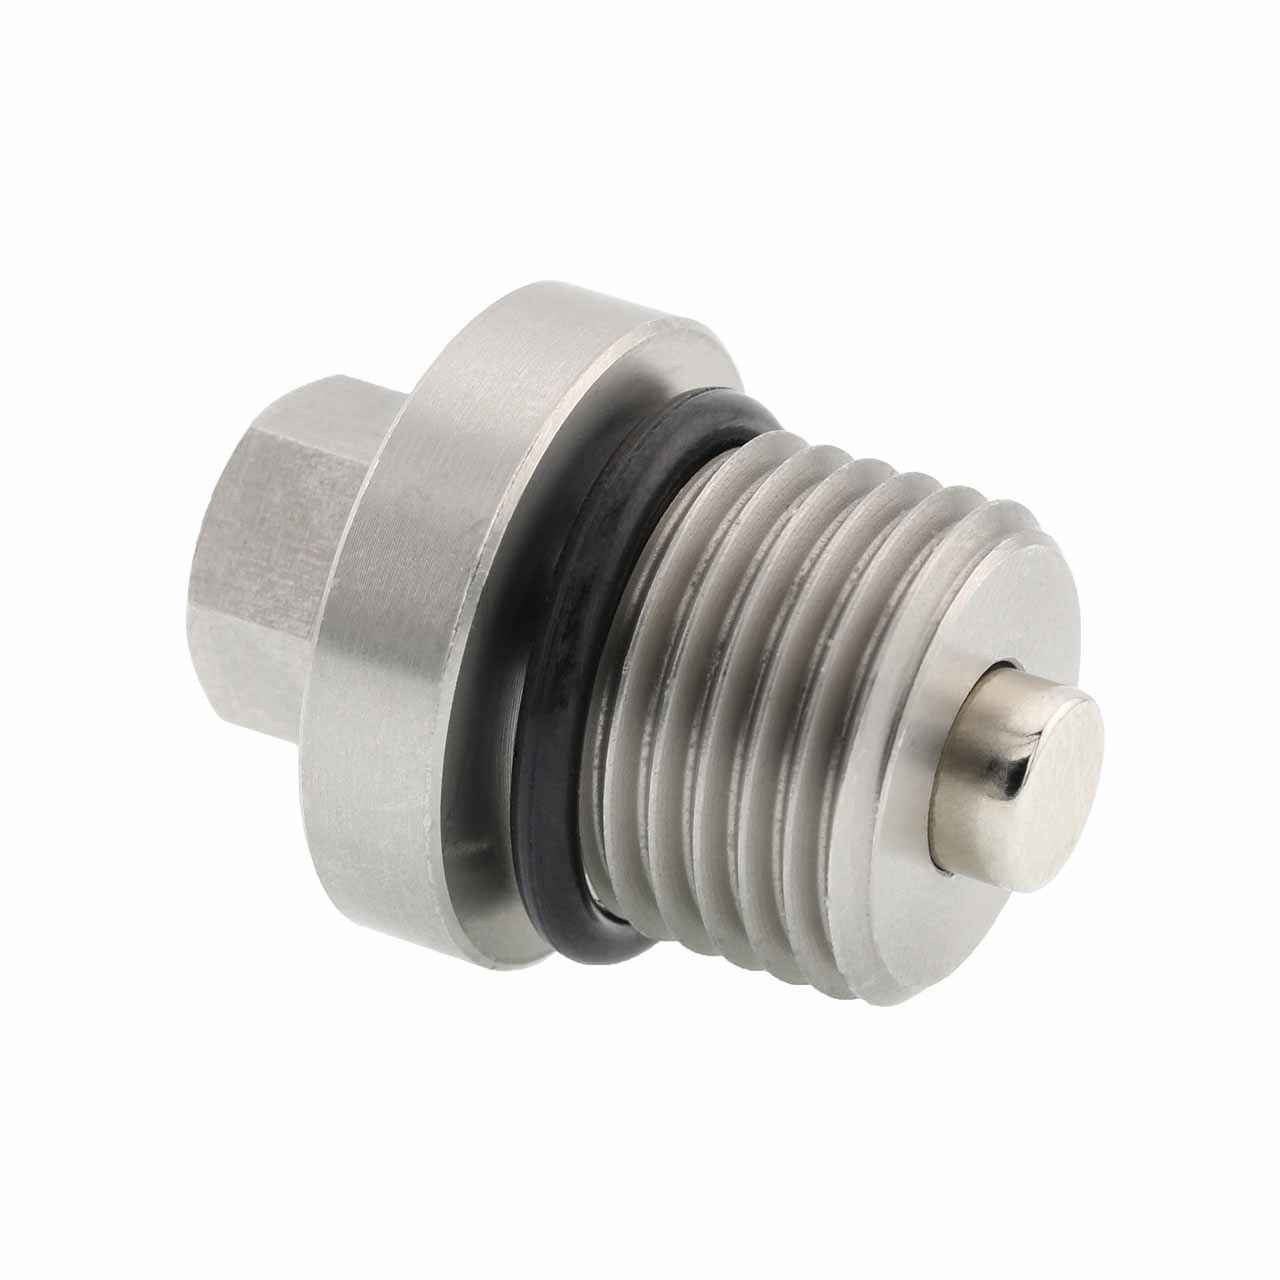 0AA-409-057 for Audi/VW - Stainless Steel Oil Drain Plug with Neodymium Magnet